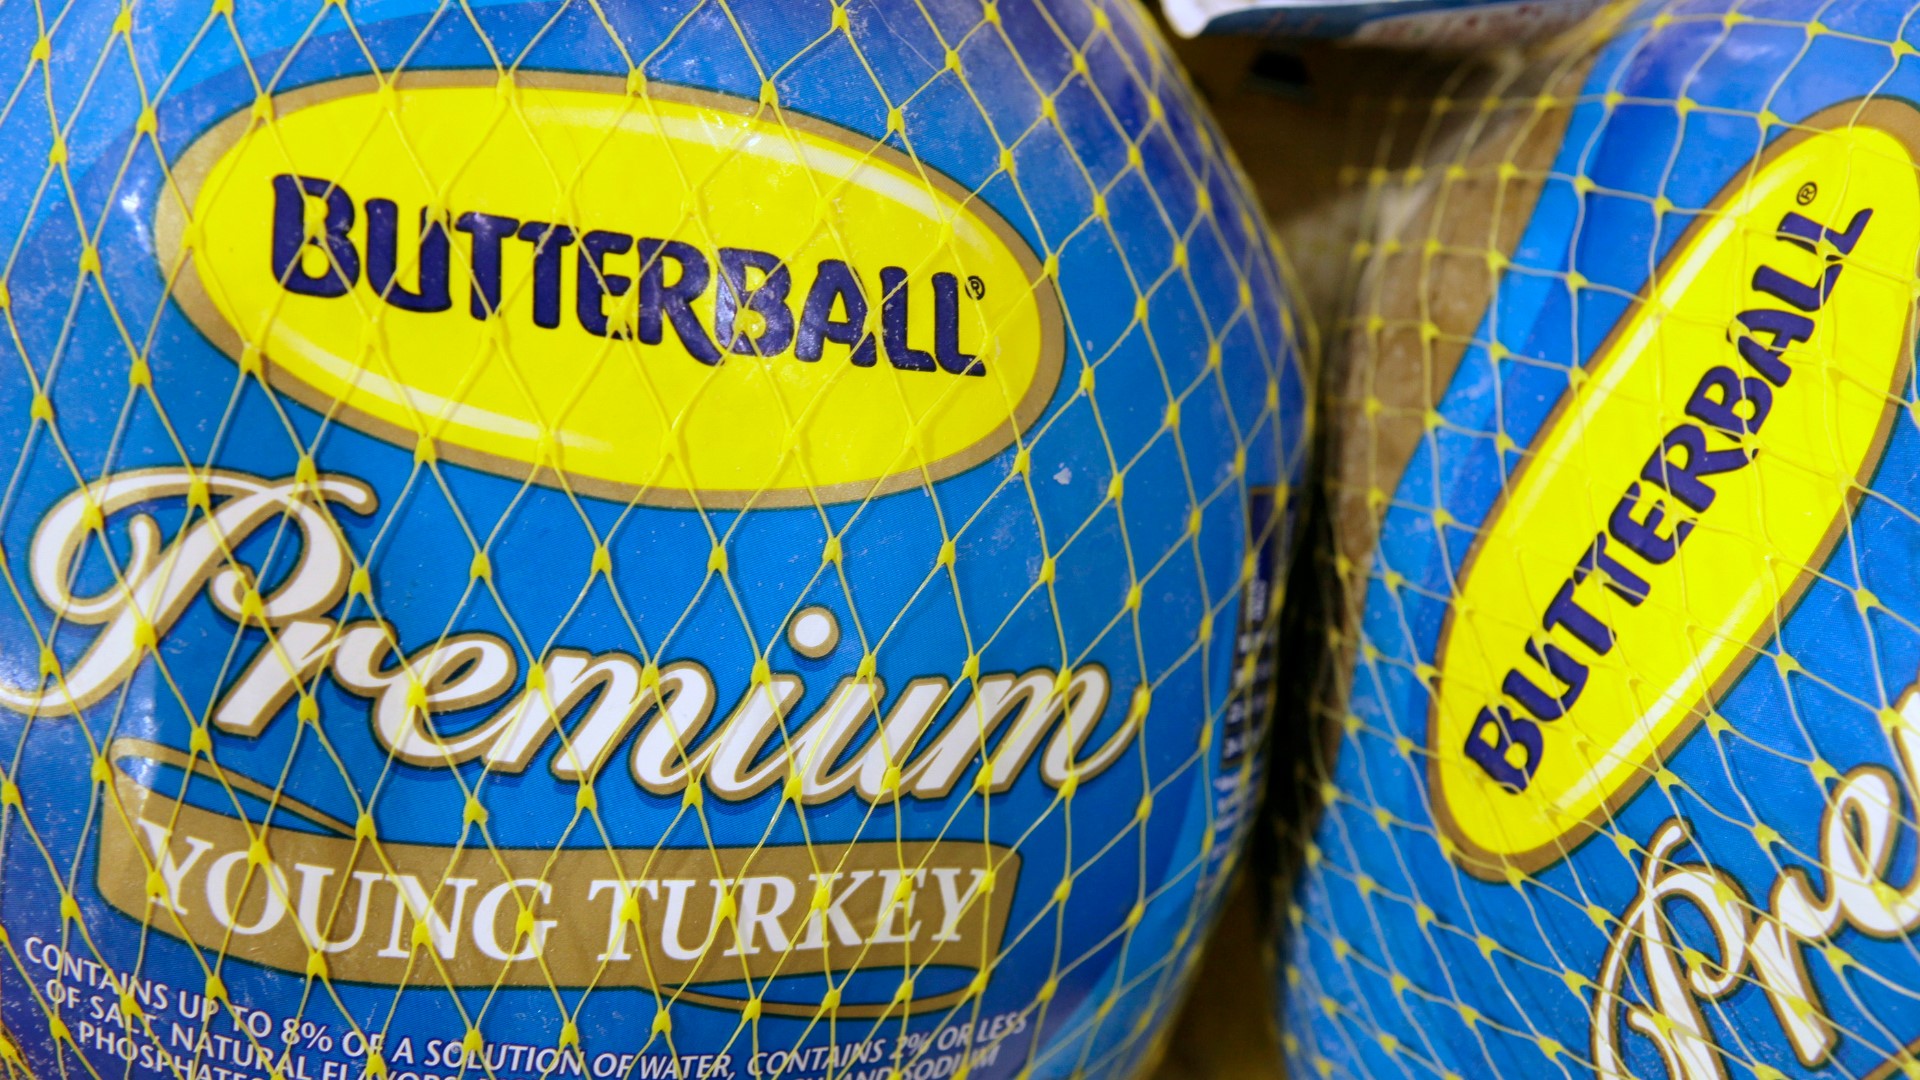 Butterball provides 1 in 3 of the turkeys at Thanksgiving feasts, and all of those birds are processed in Arkansas.